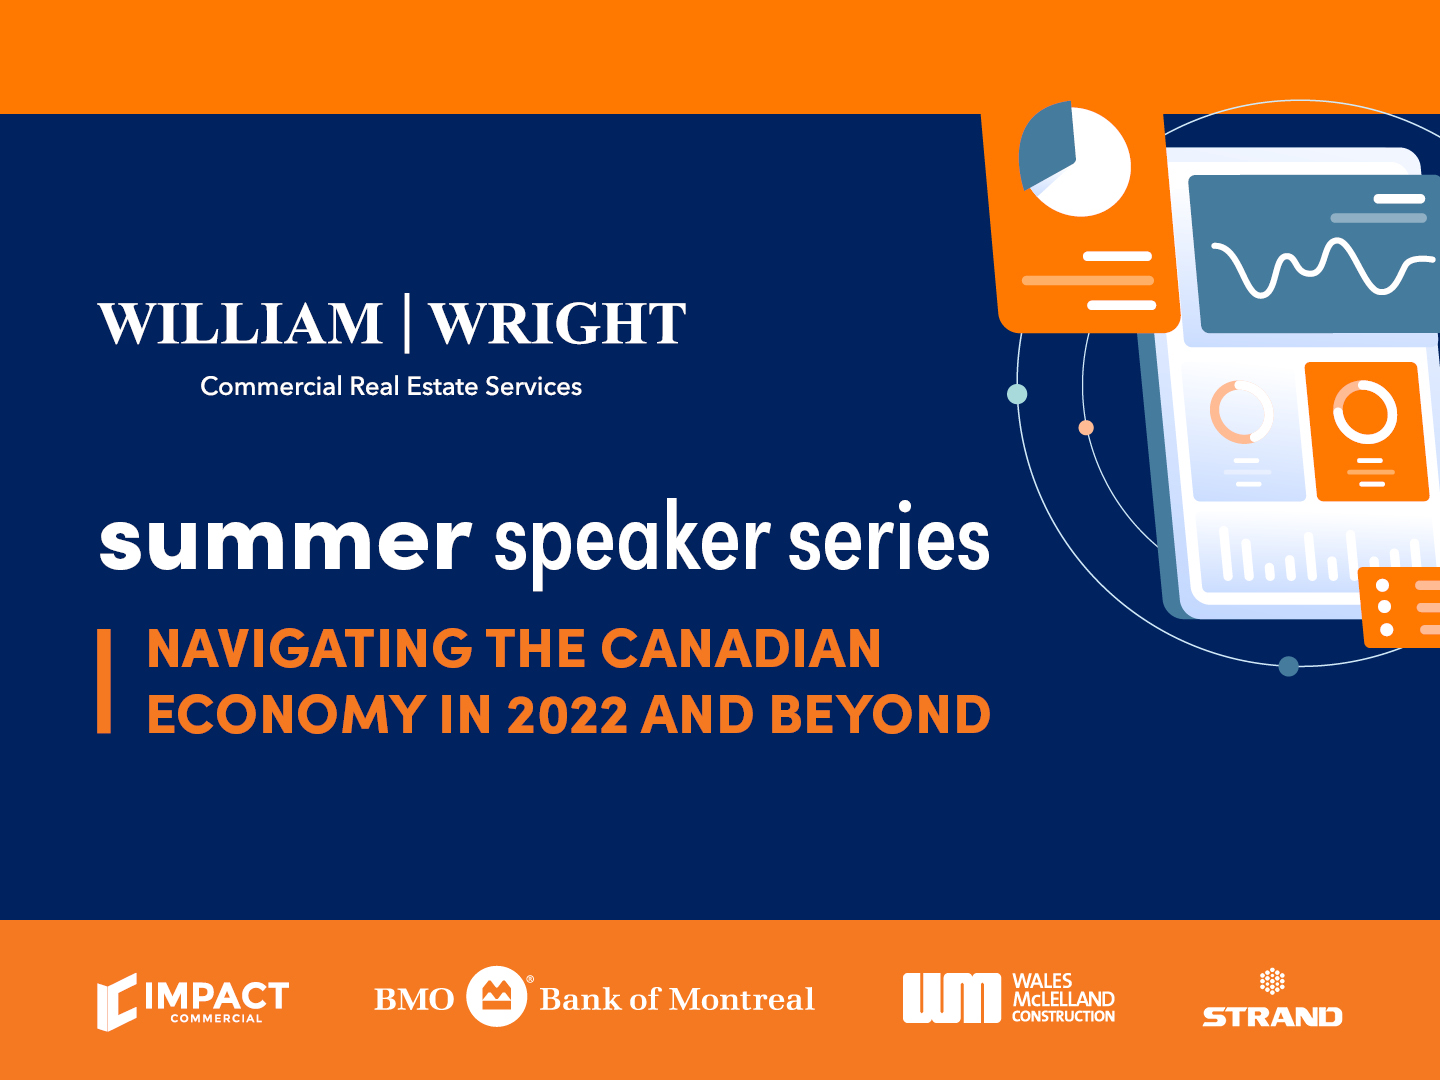 Summer Speaker Series: Navigating the Canadian Economy in 2022 and Beyond | William Wright Commercial Real Estate Services